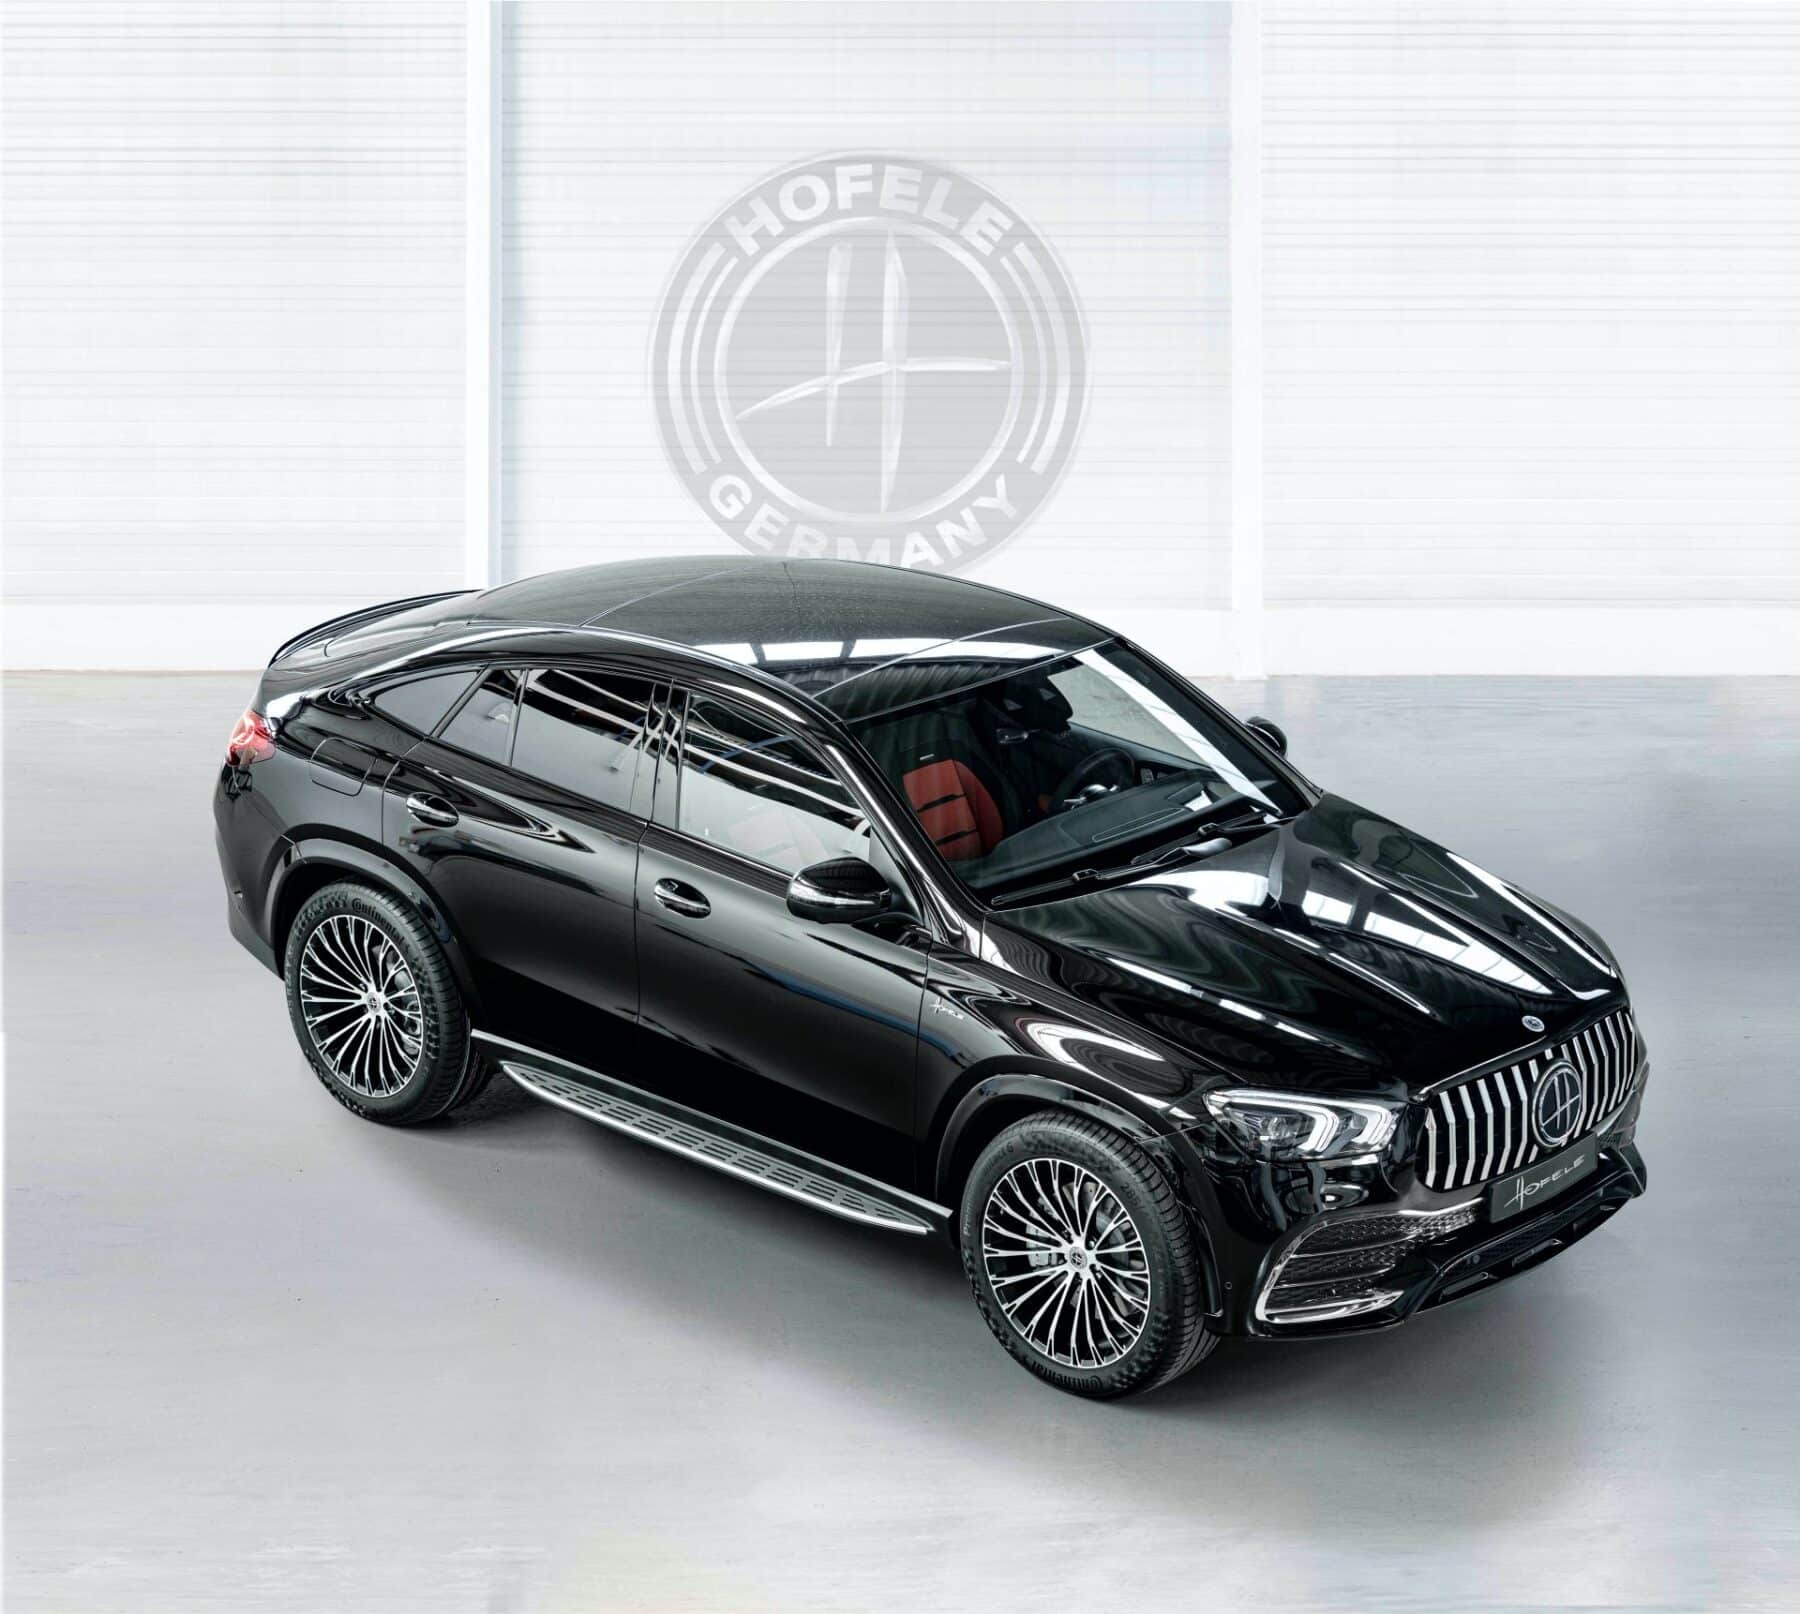 The Mercedes-Benz GLE Coupé by Hofele is inspired by the Maybachs to offer maximum luxury